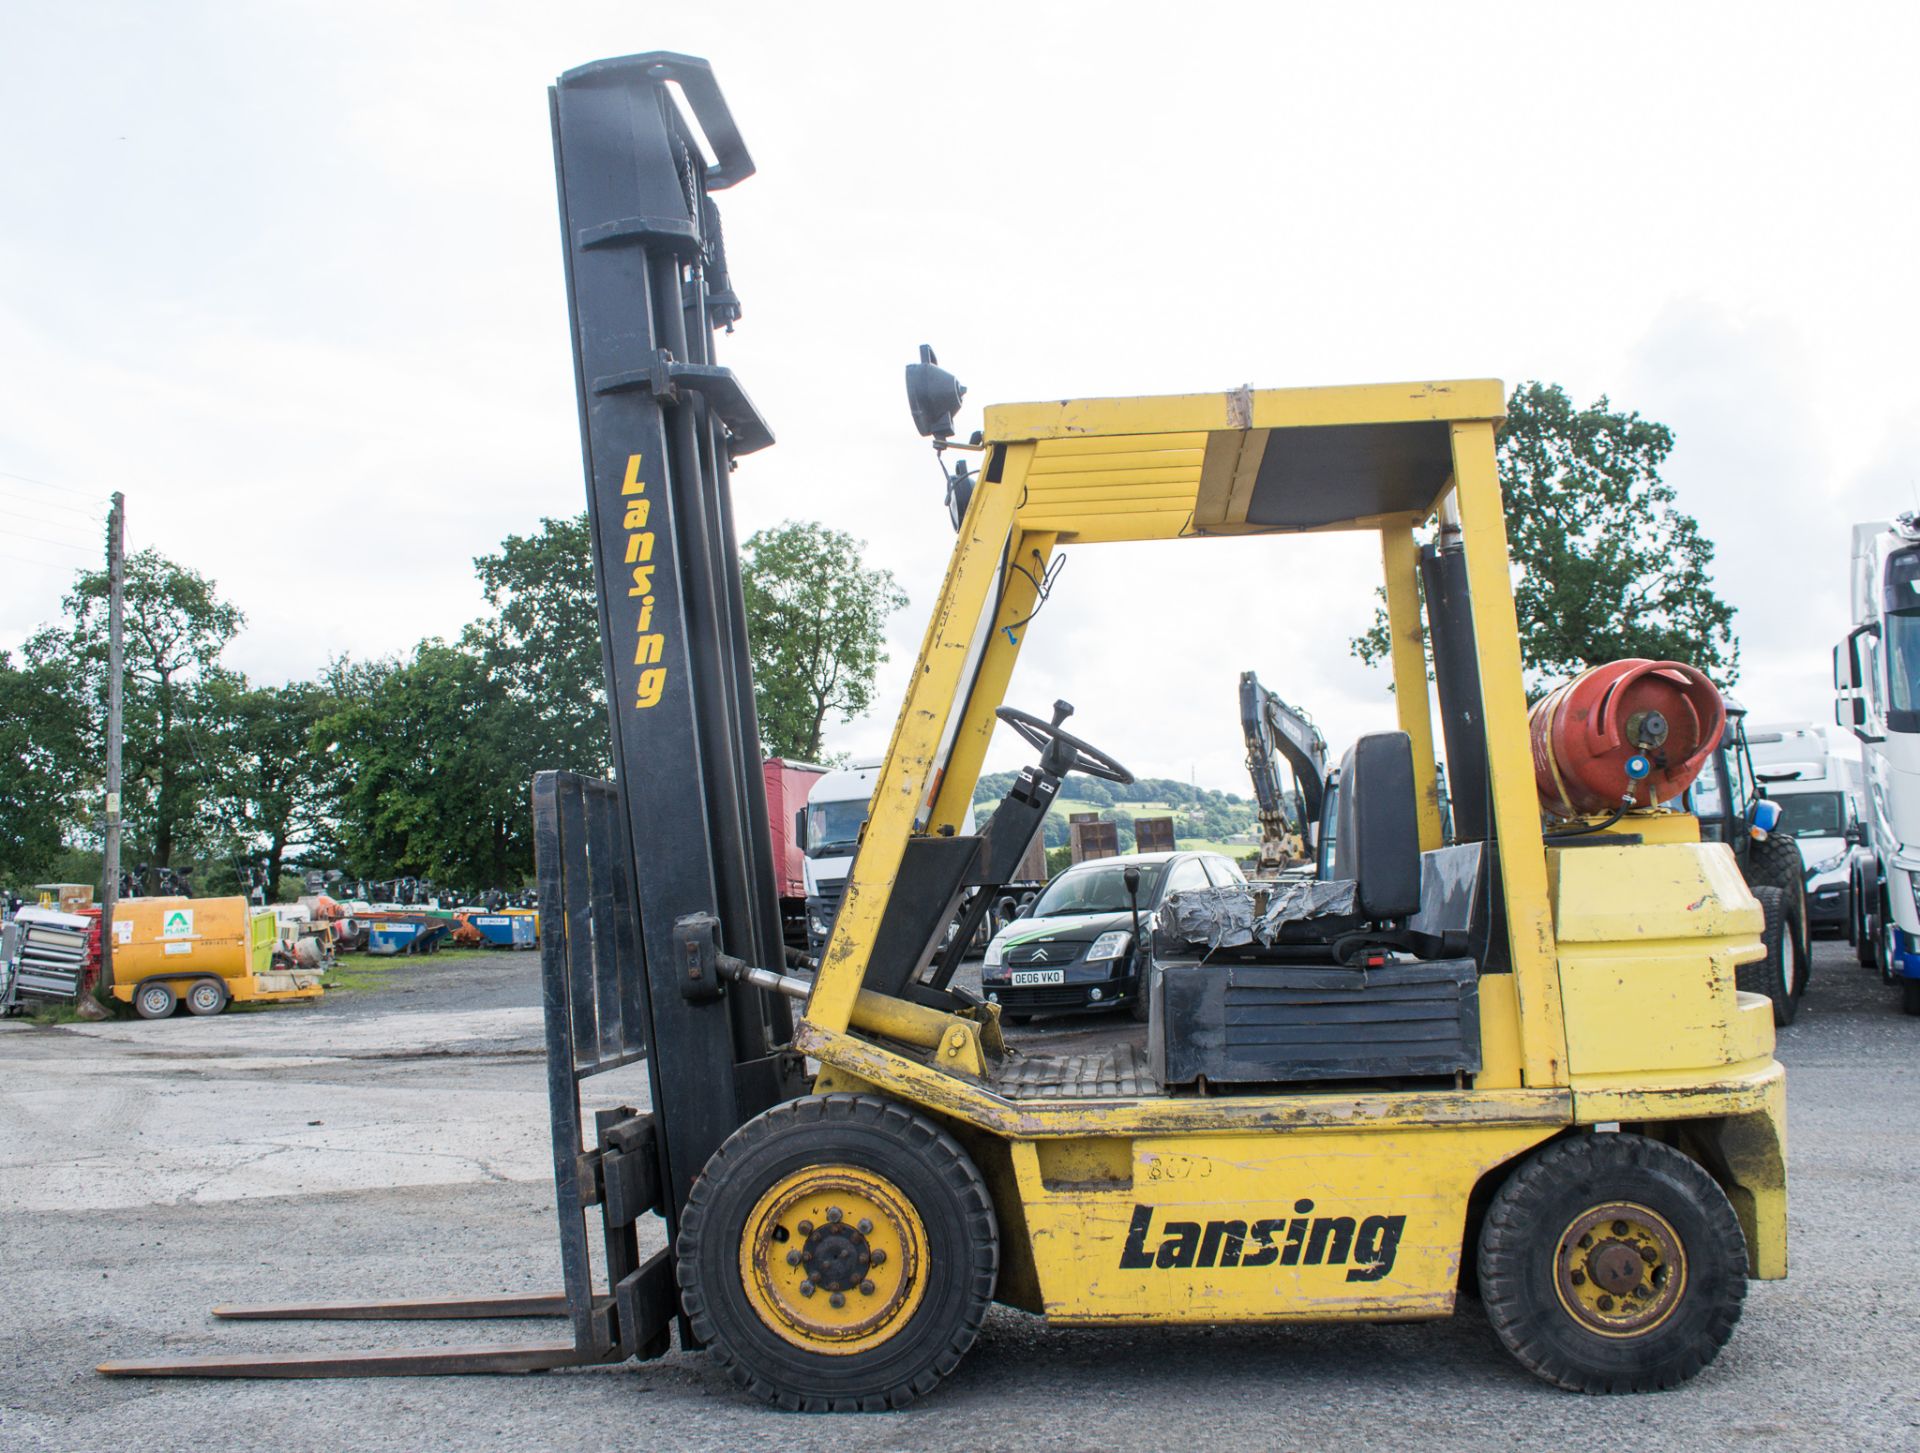 Lansing 7/2.5 2.5 tonne gas powered fork lift truck S/N: 36725 Recorded Hours: 219 - Image 5 of 12